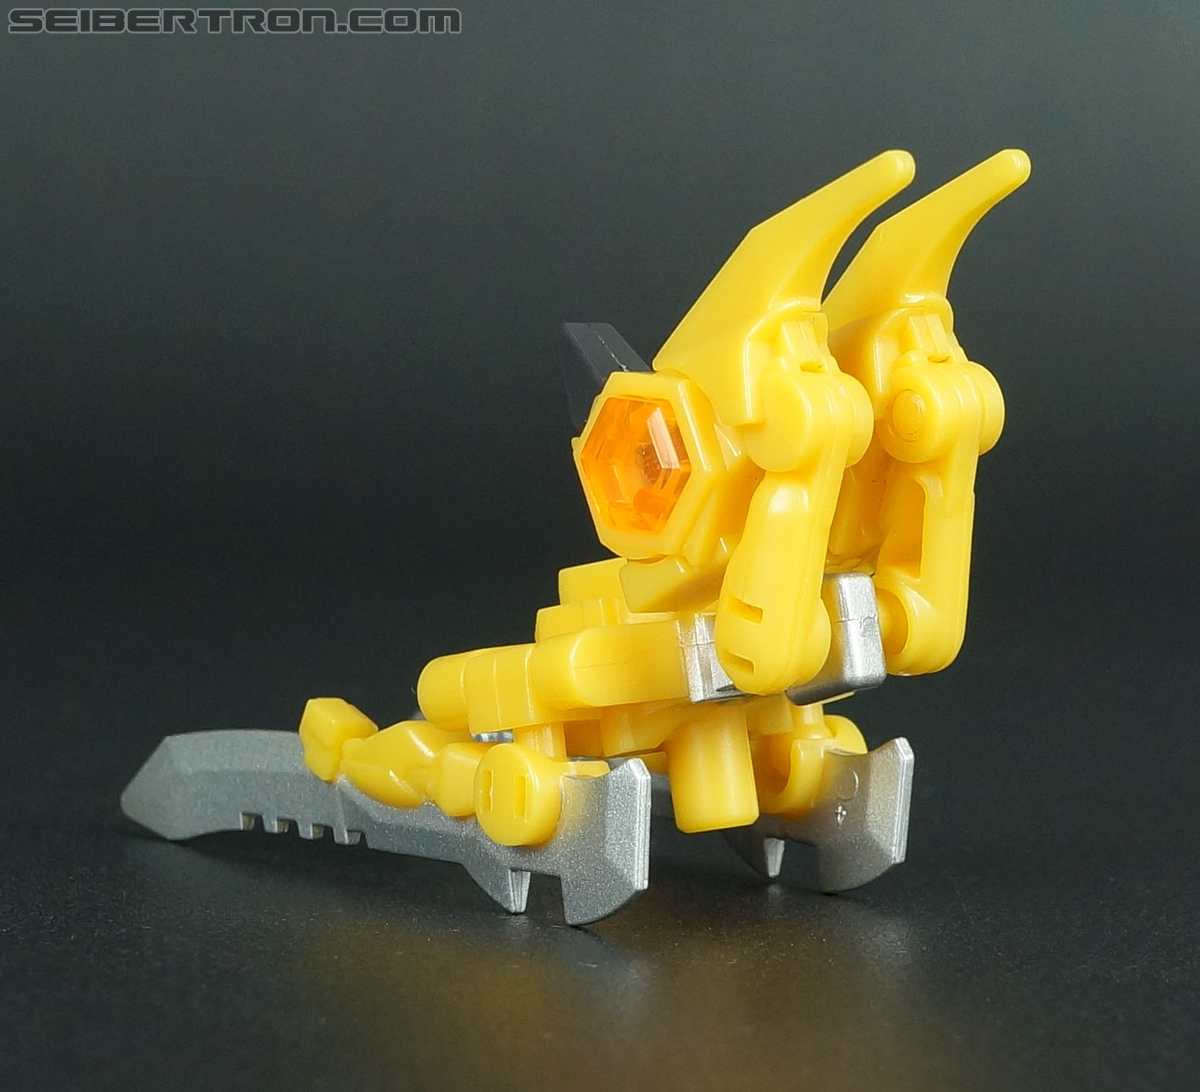 Transformers Arms Micron Bumblebee Sword (Image #63 of 75)